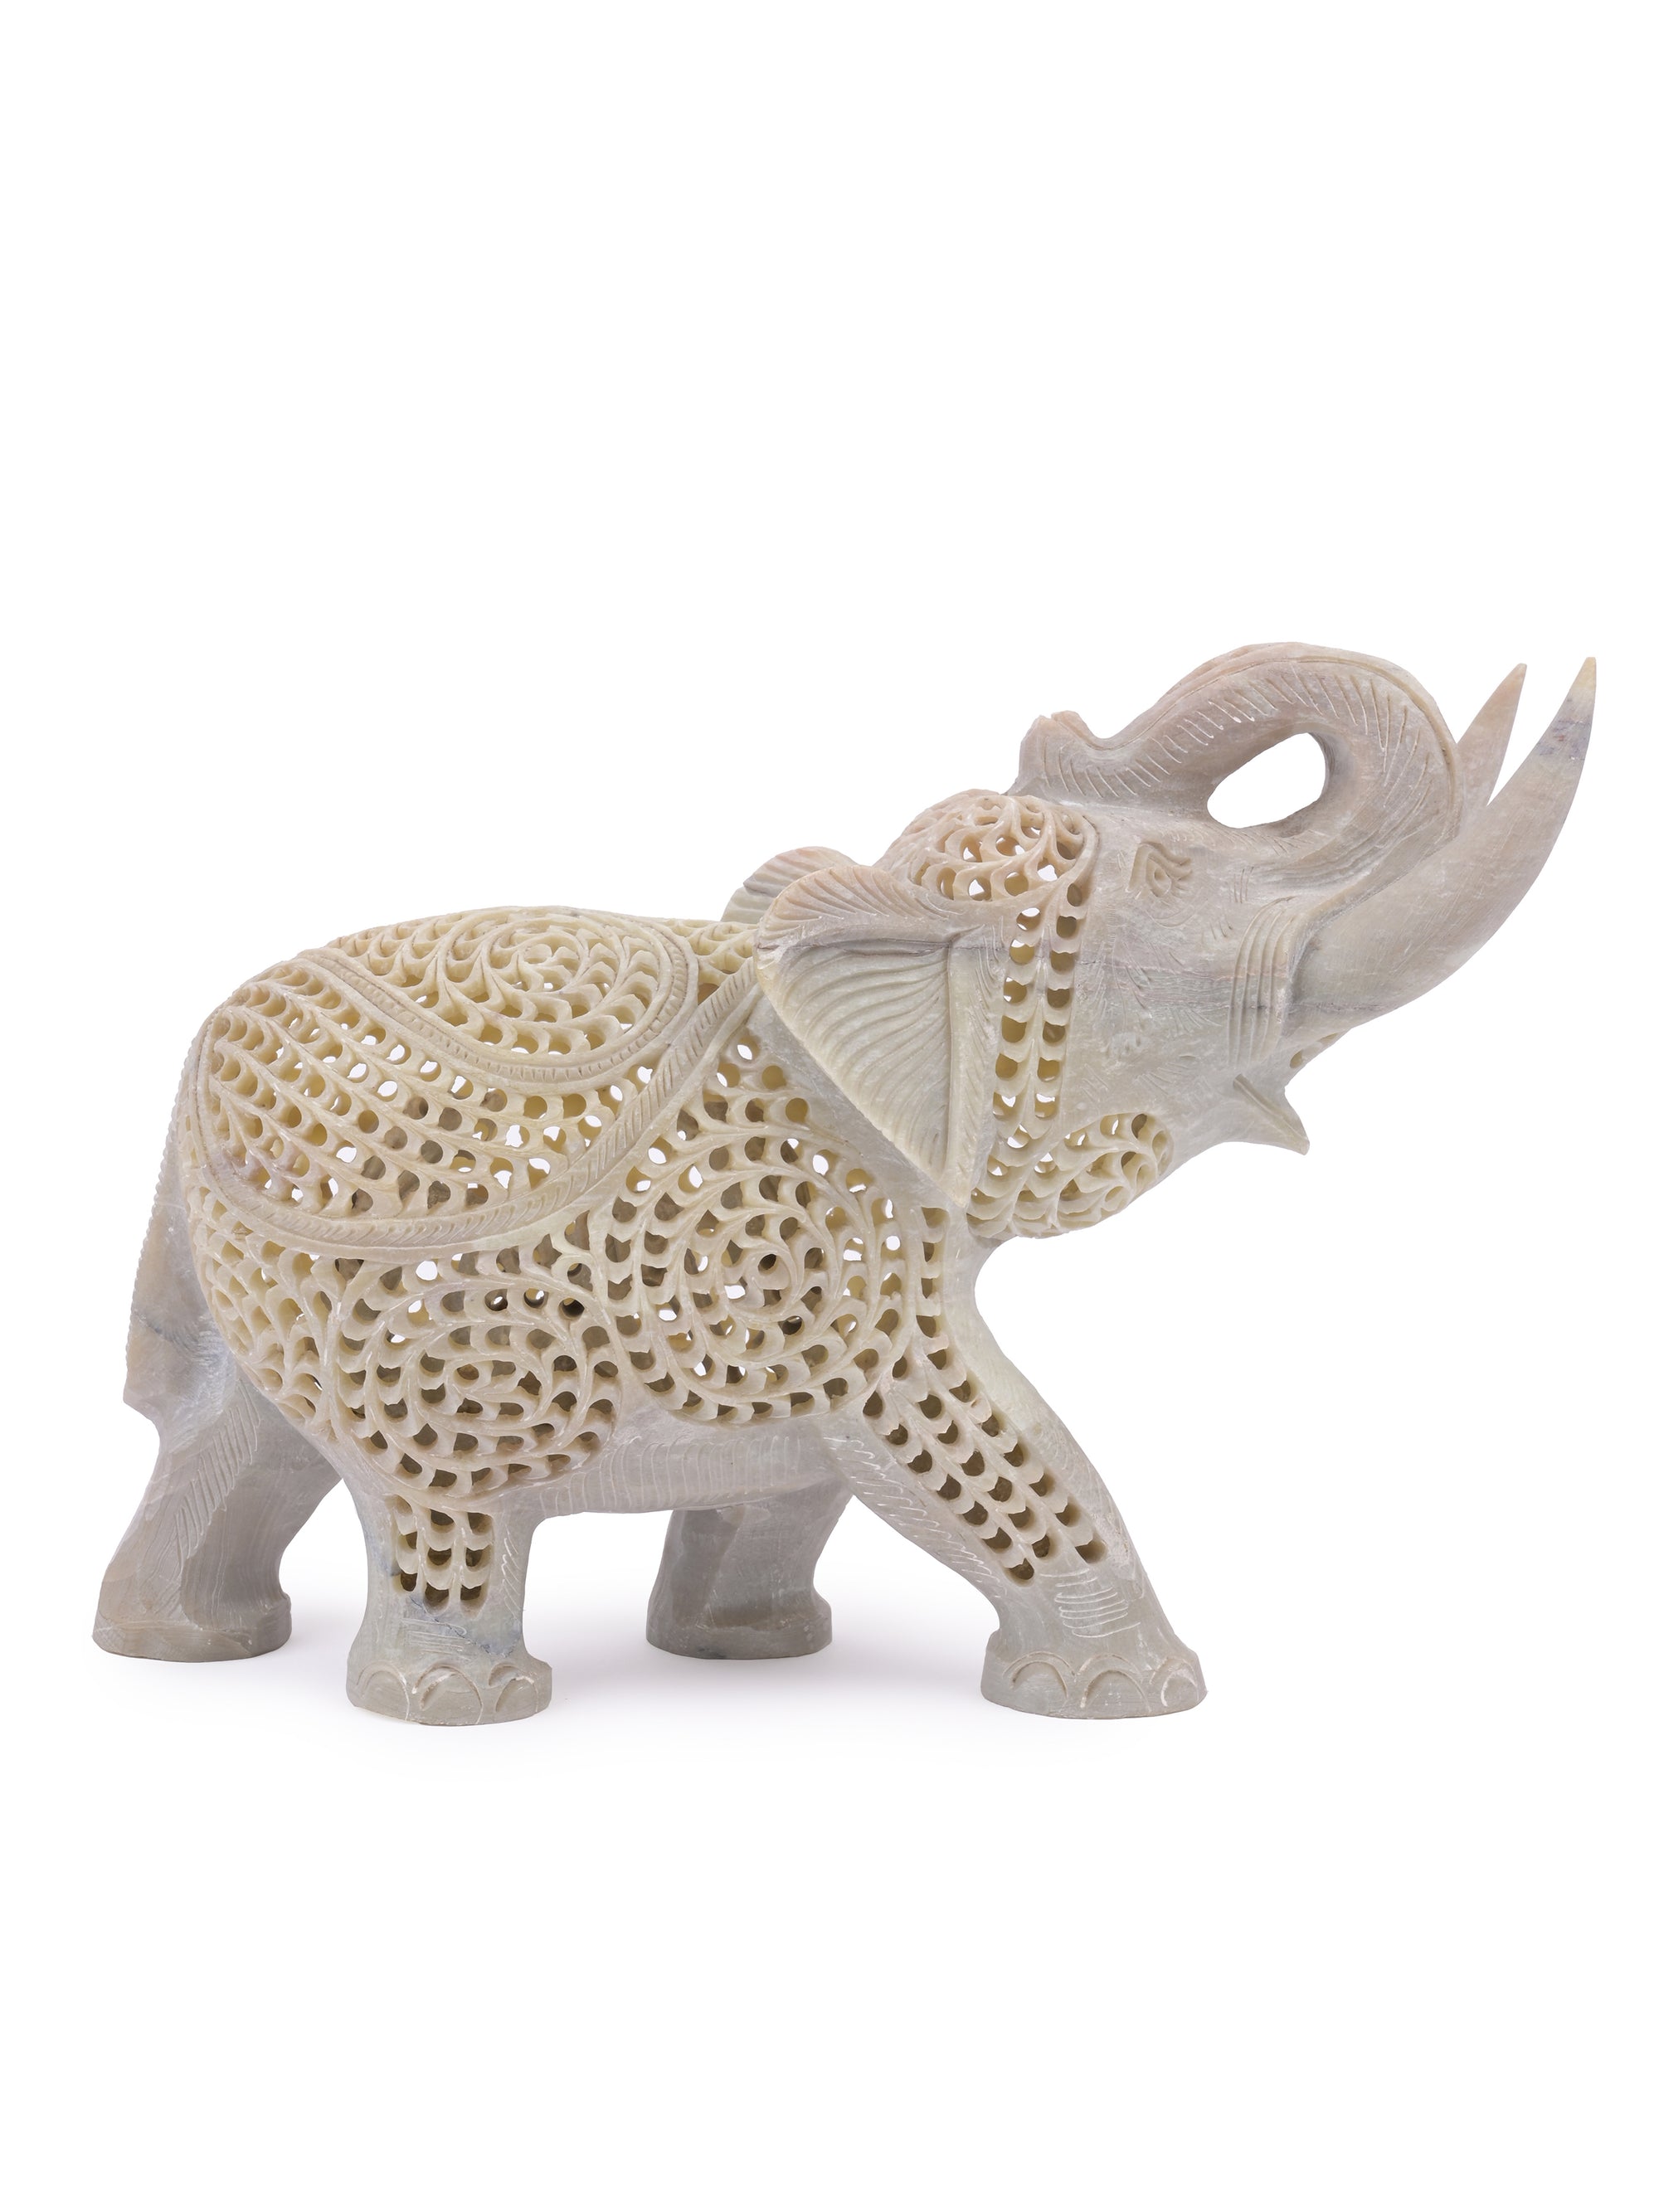 Mighty Elephant hand crafted in stone with Jali design - The Heritage Artifacts